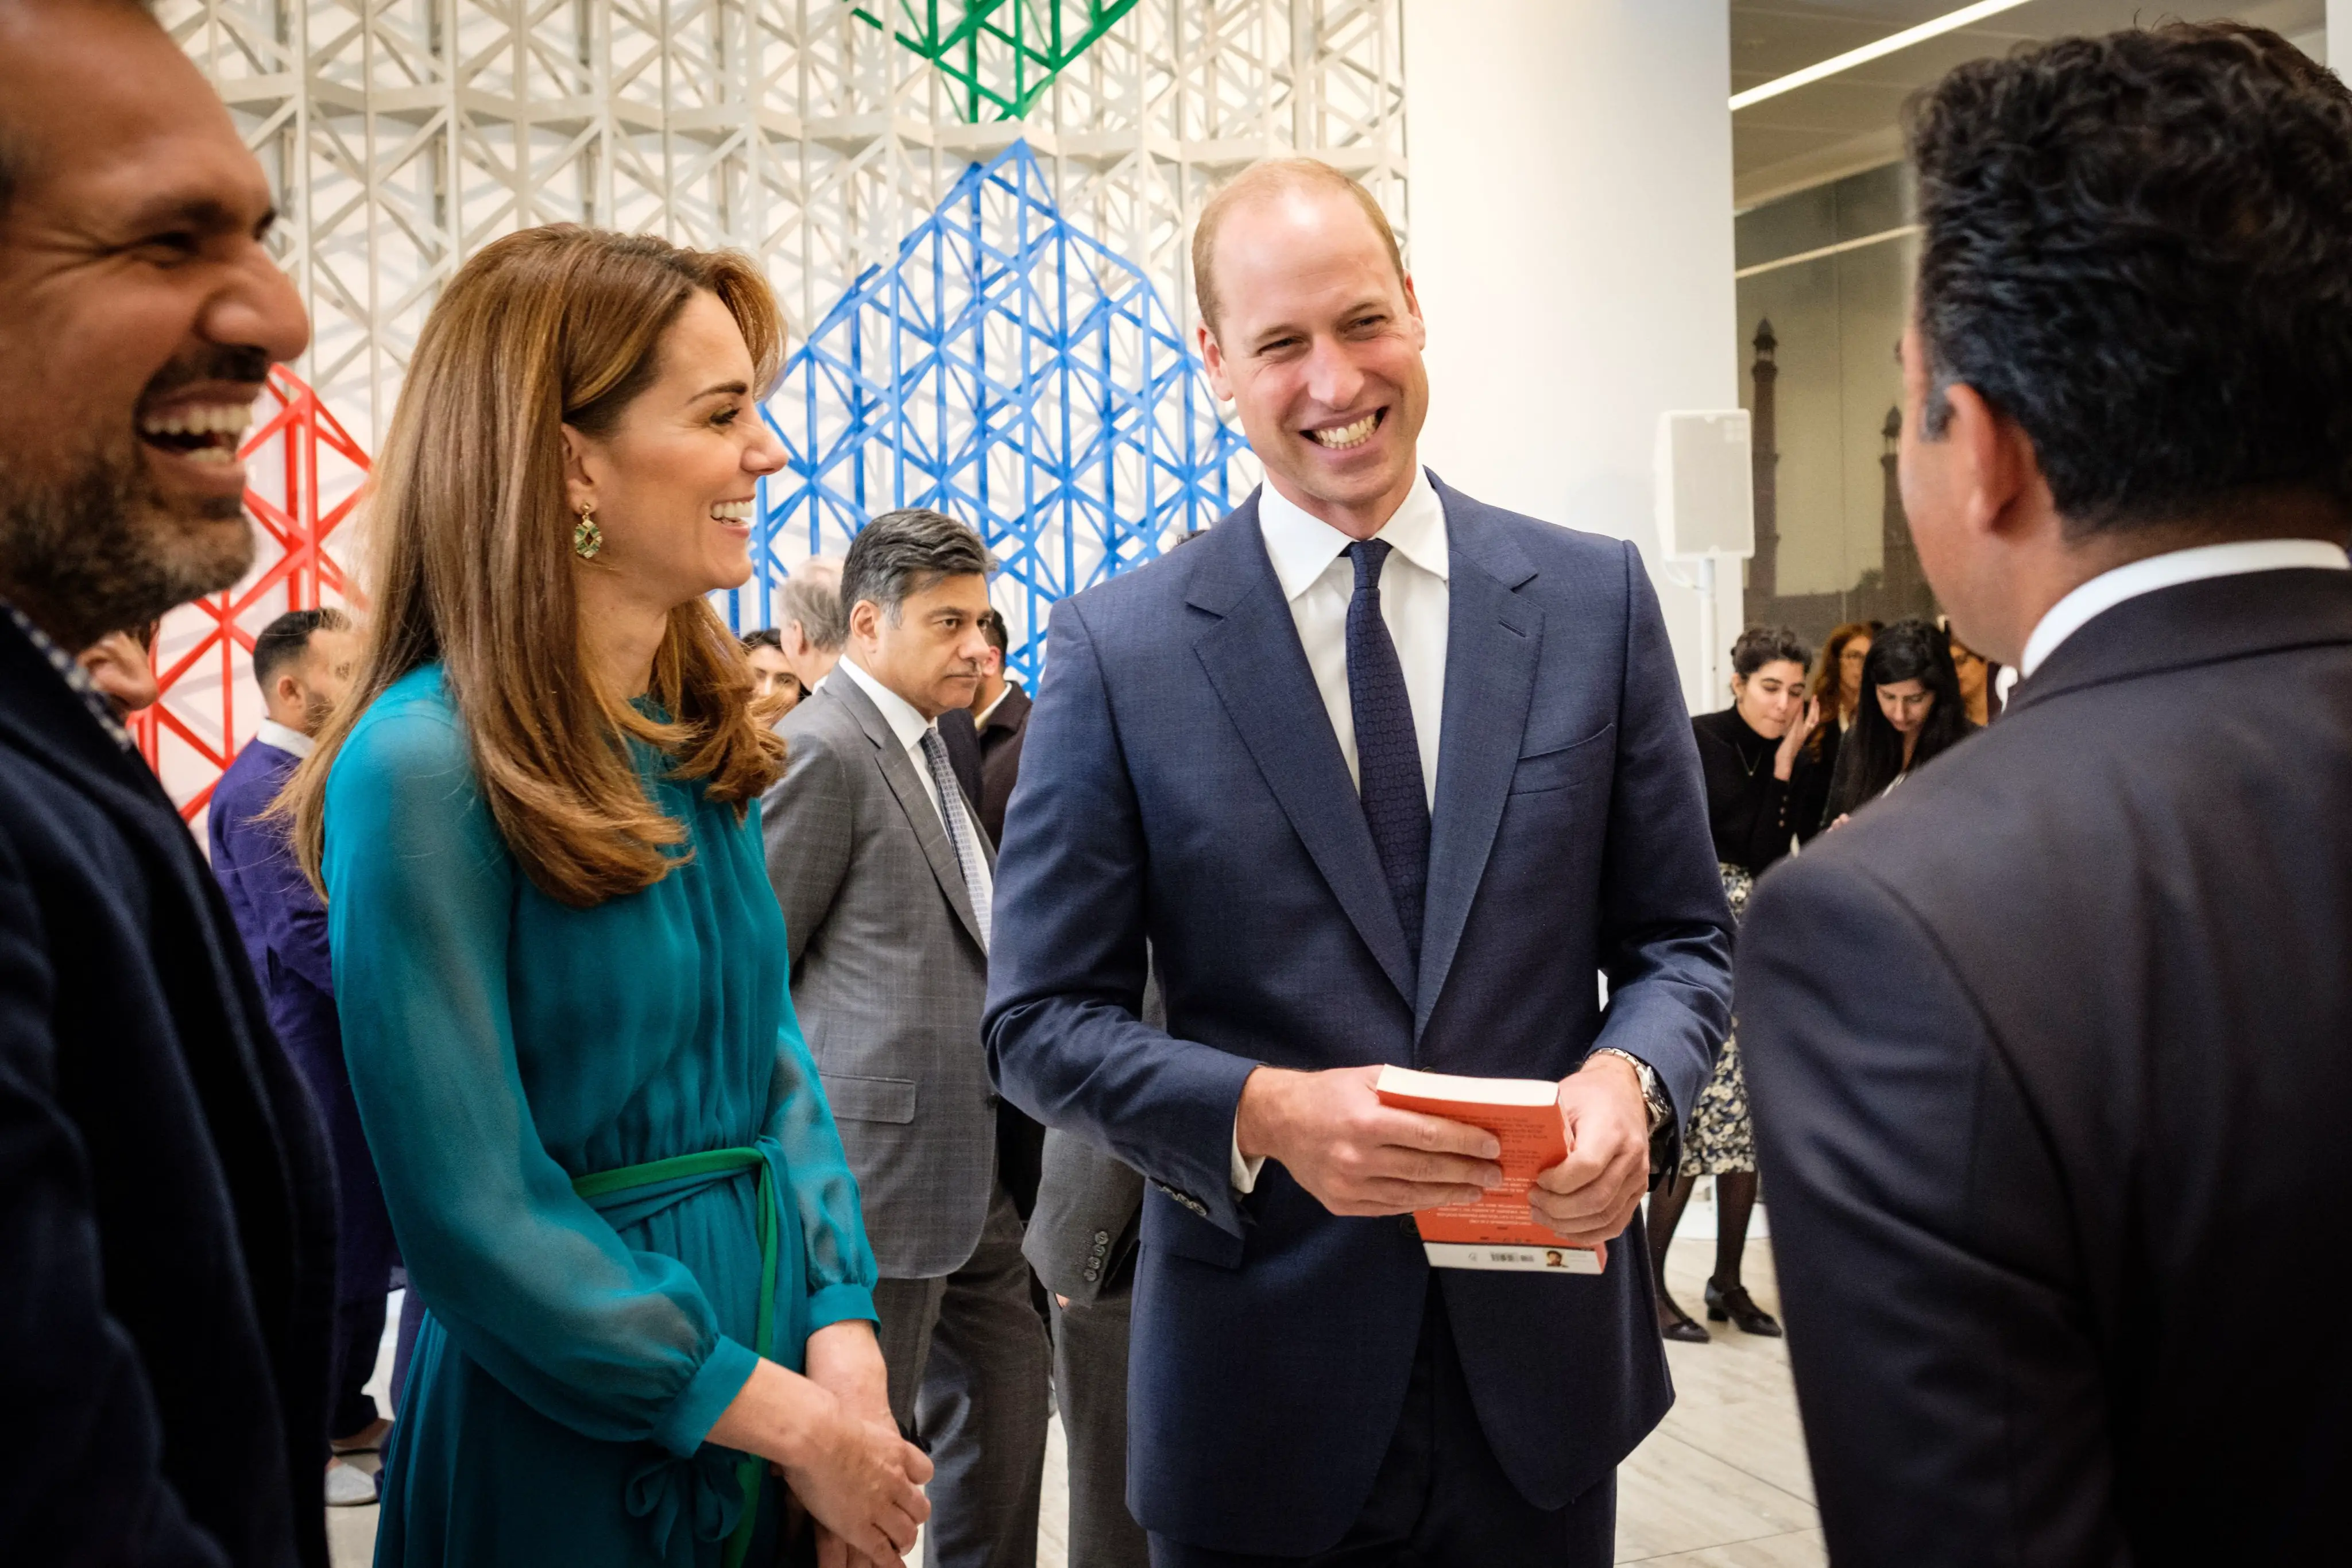 The Duke and Duchess of Cambridge attended special event at Aga Khan Center in London ahead of their Pakistan visit